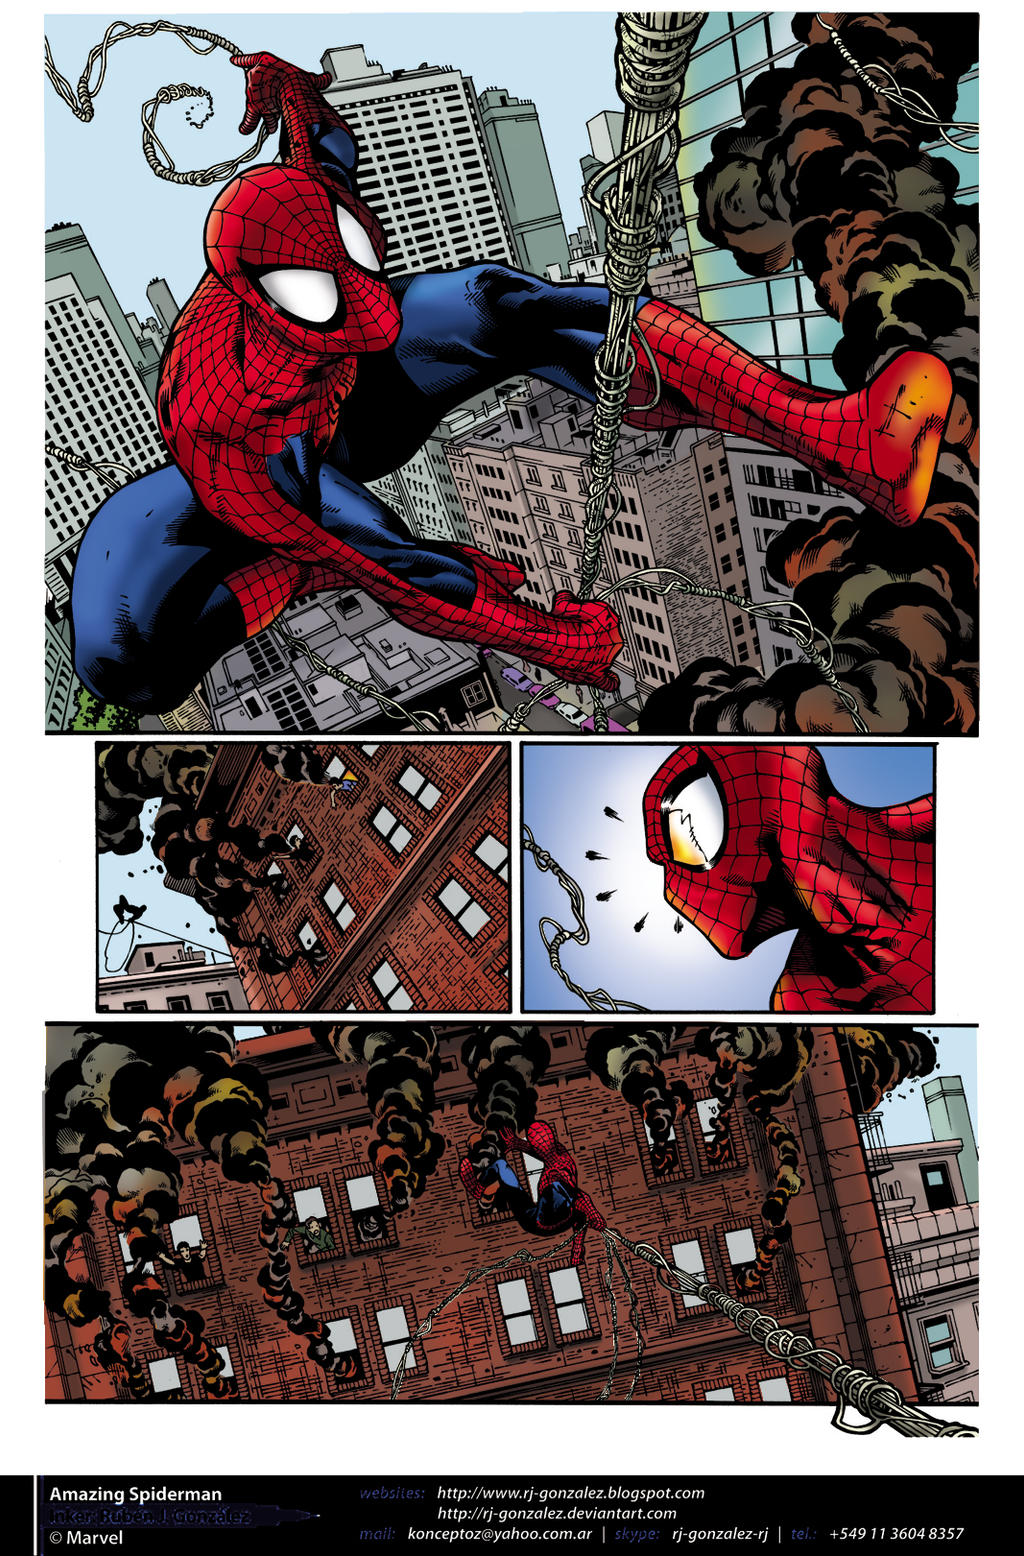 Spider-Man - Burning Building Rescue by shubcthulhu on DeviantArt